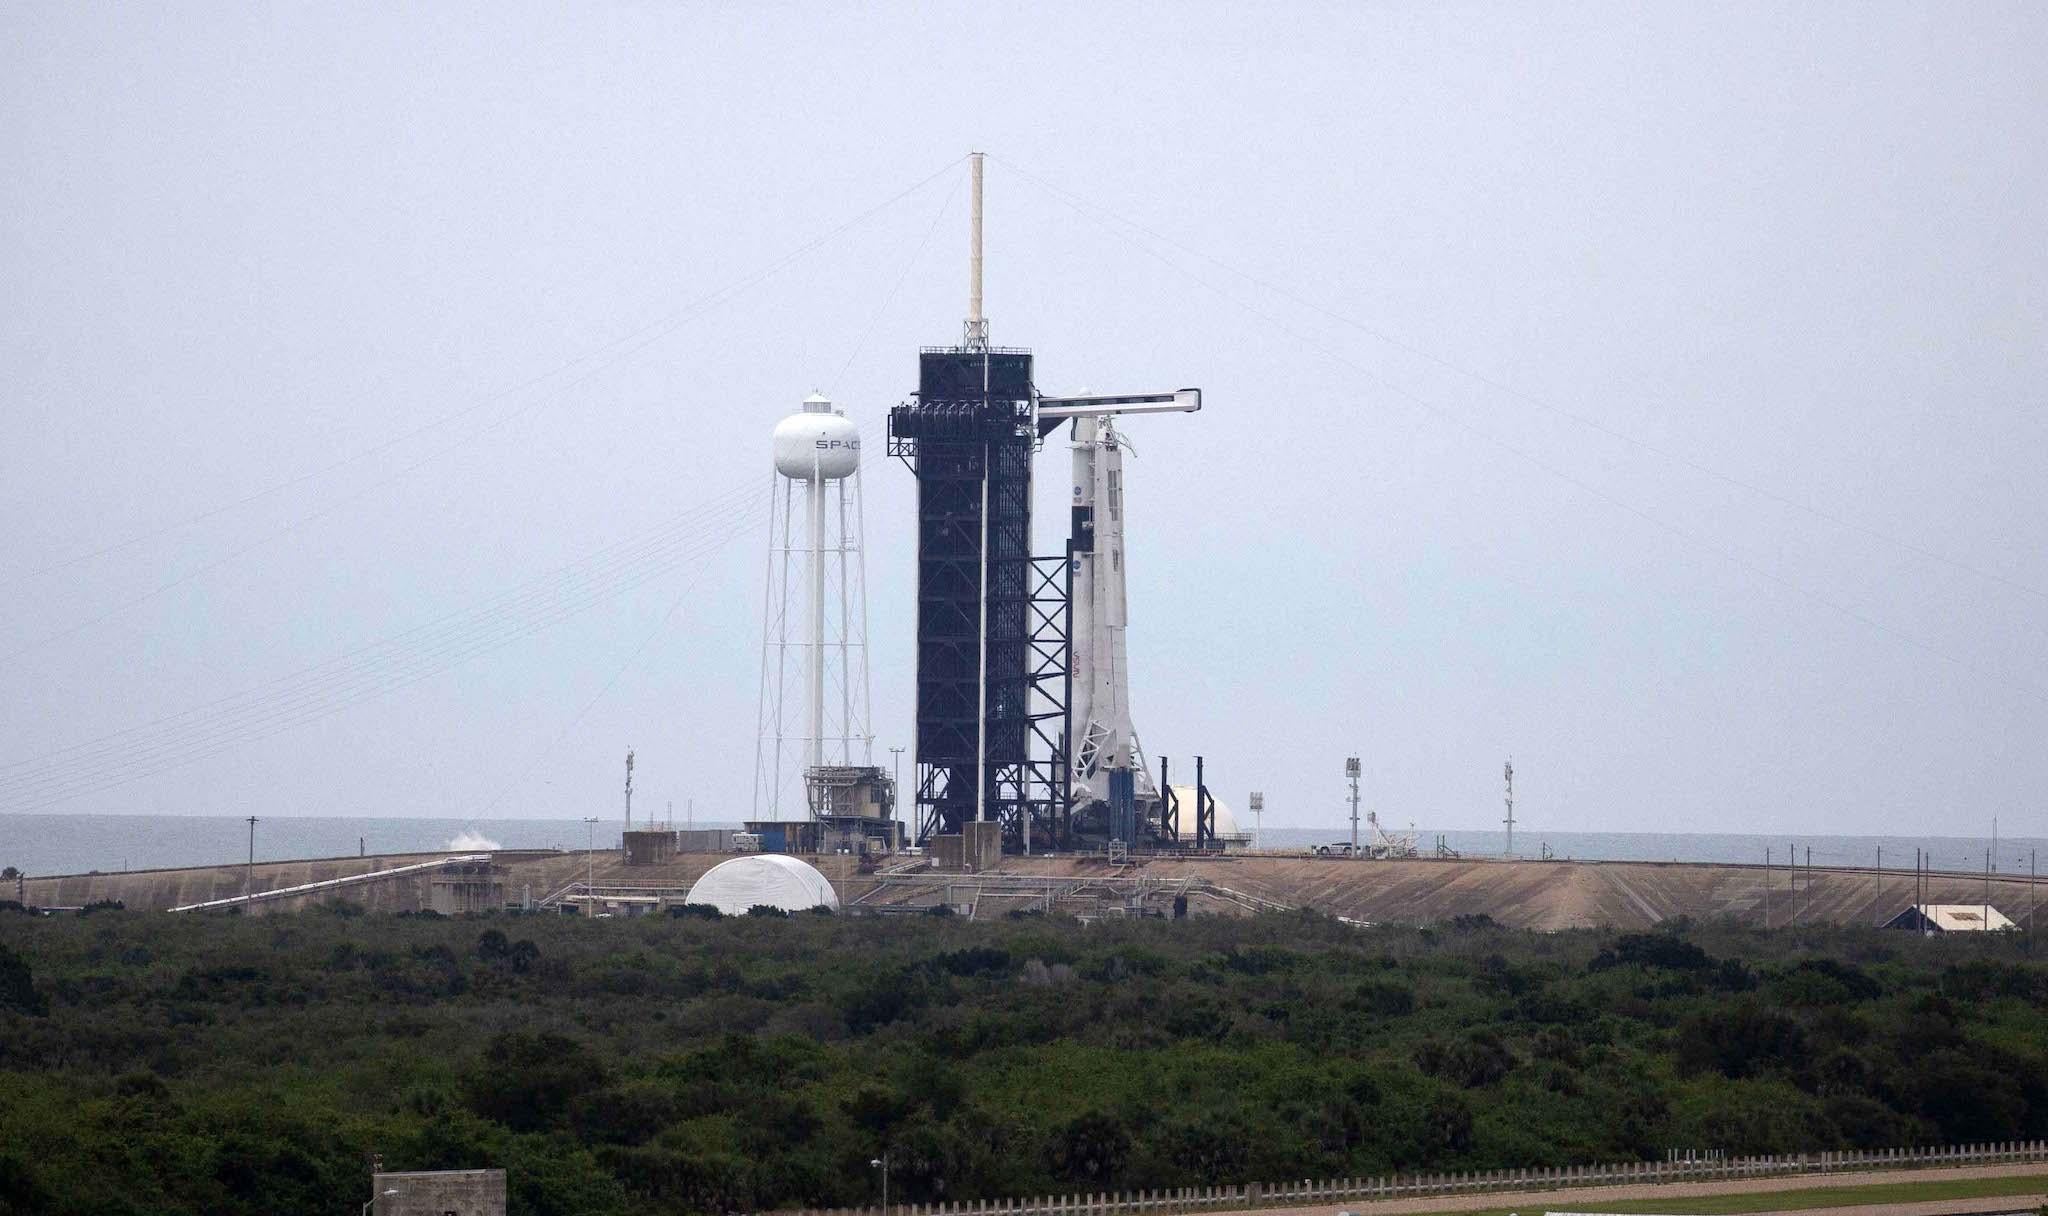 The SpaceX Falcon 9 rocket with the manned Crew Dragon spacecraft sits on launch pad 39A at the Kennedy Space Center on May 27, 2020 in Cape Canaveral, Florida